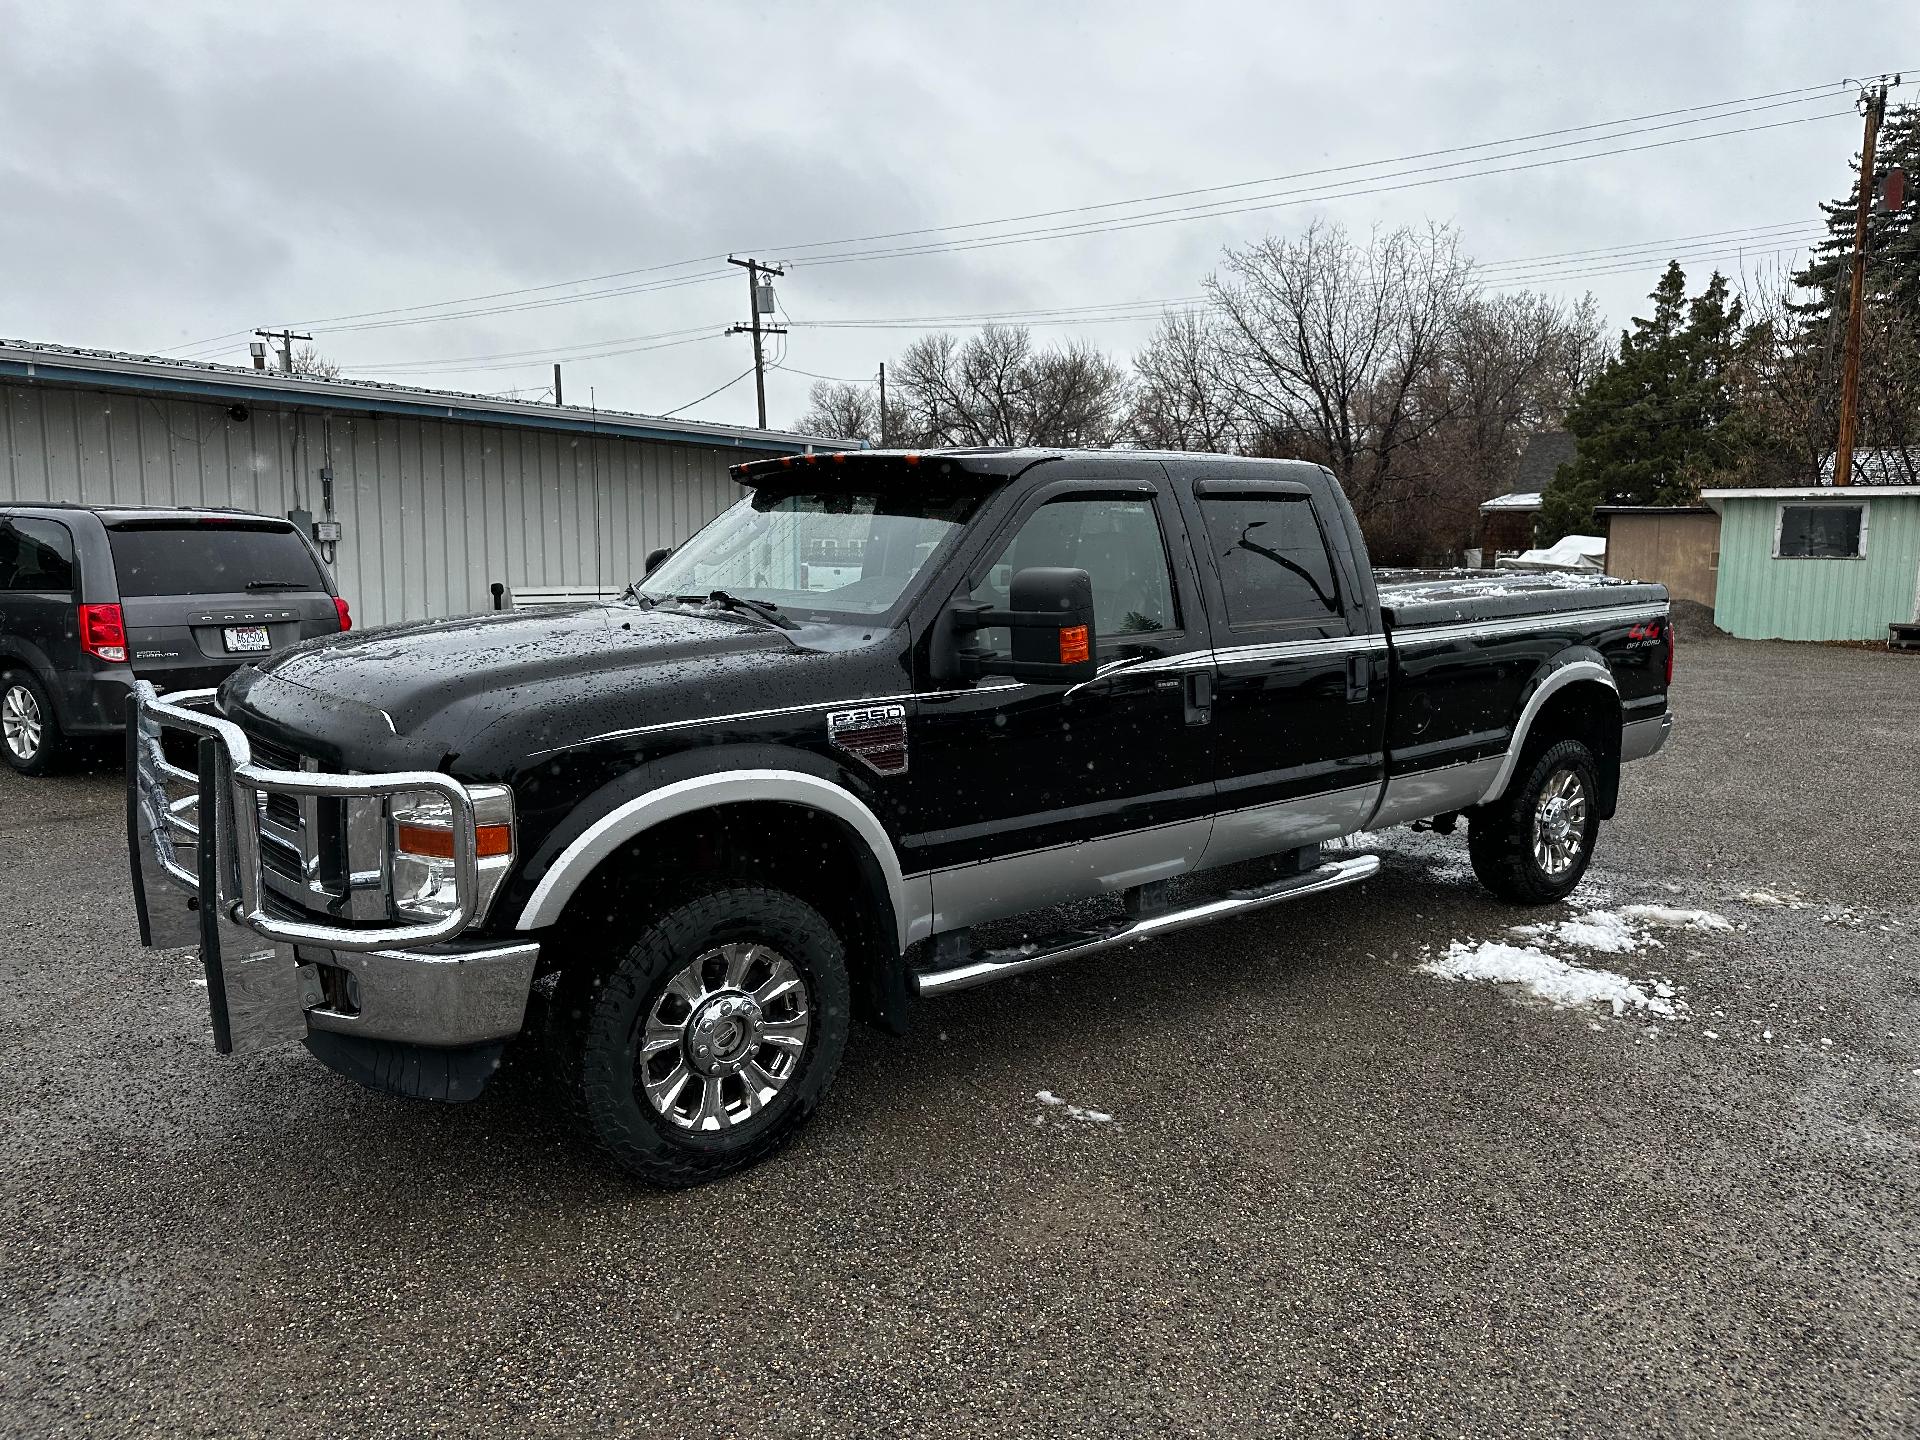 Used 2009 Ford F-350 Super Duty Lariat with VIN 1FTWW31R69EA07008 for sale in Conrad, MT